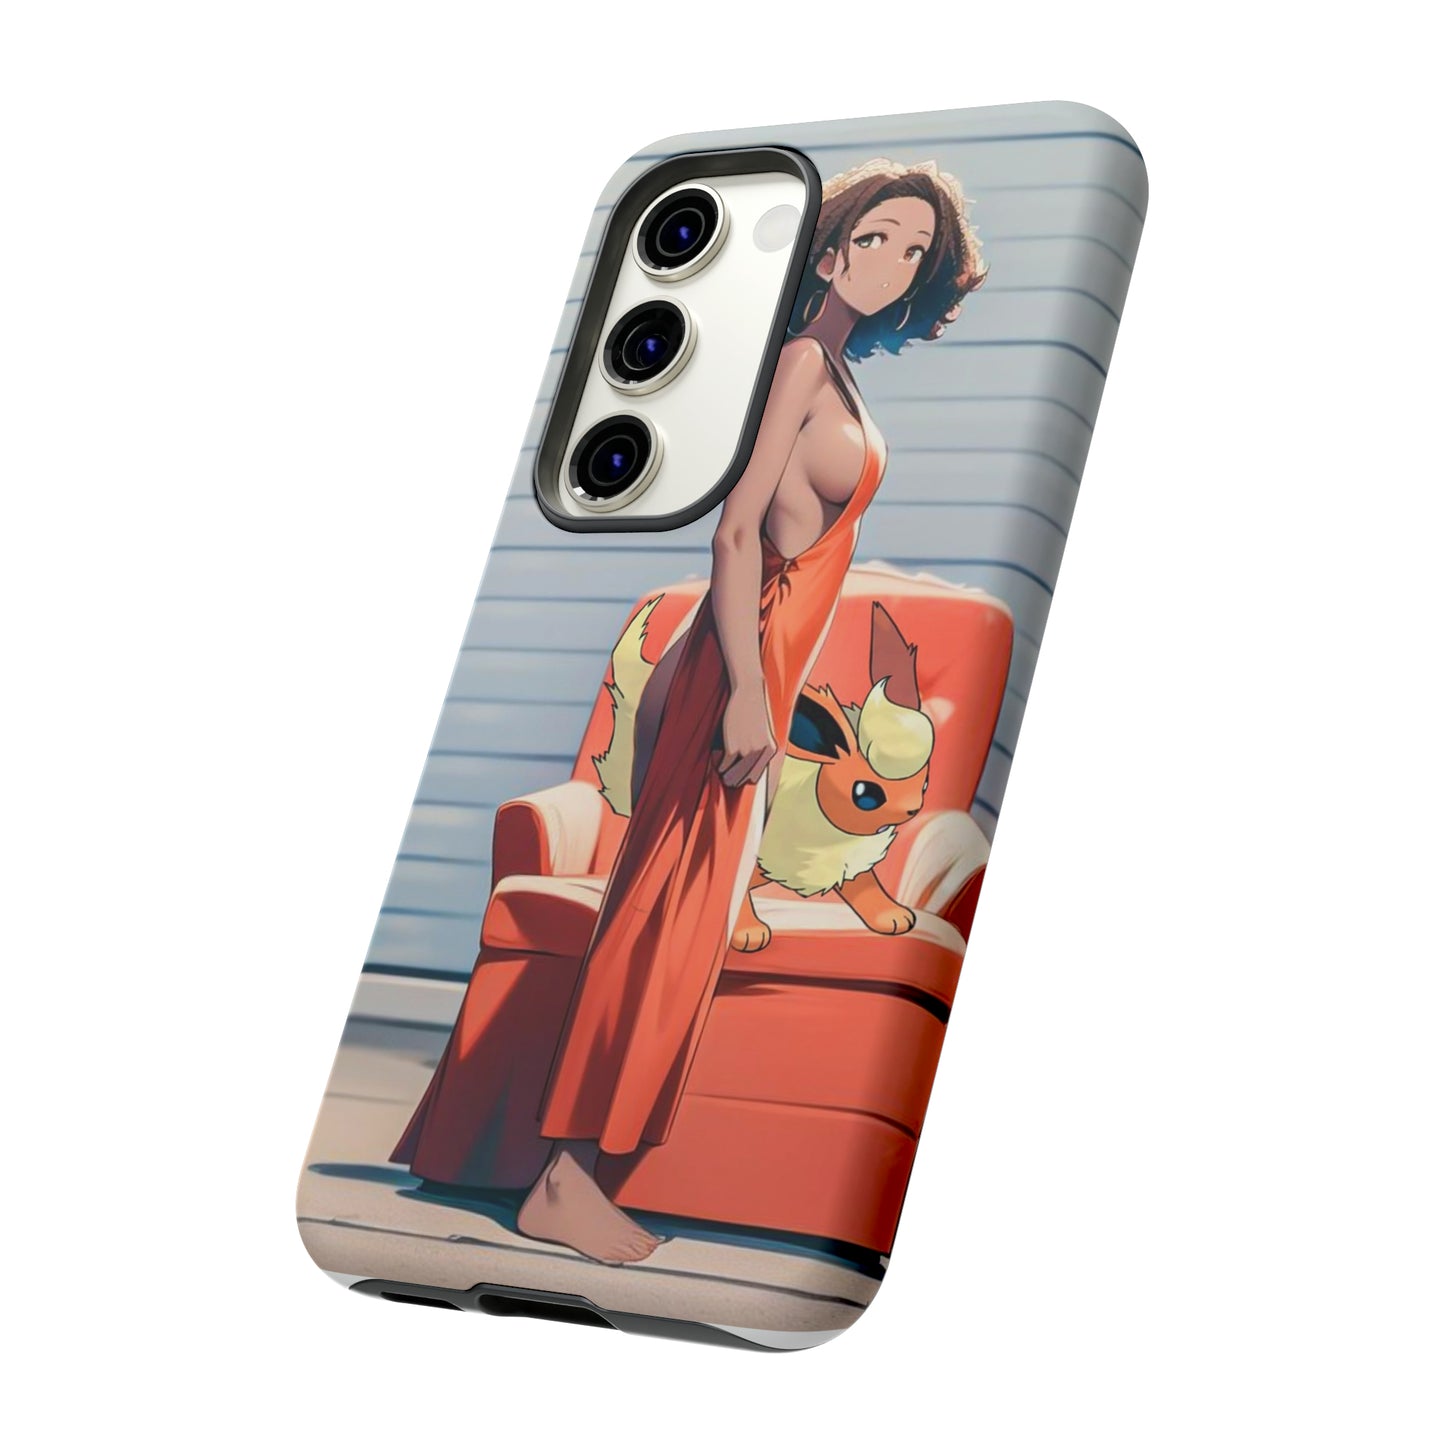 Flames She Has- Anime Style Art Tough Cases